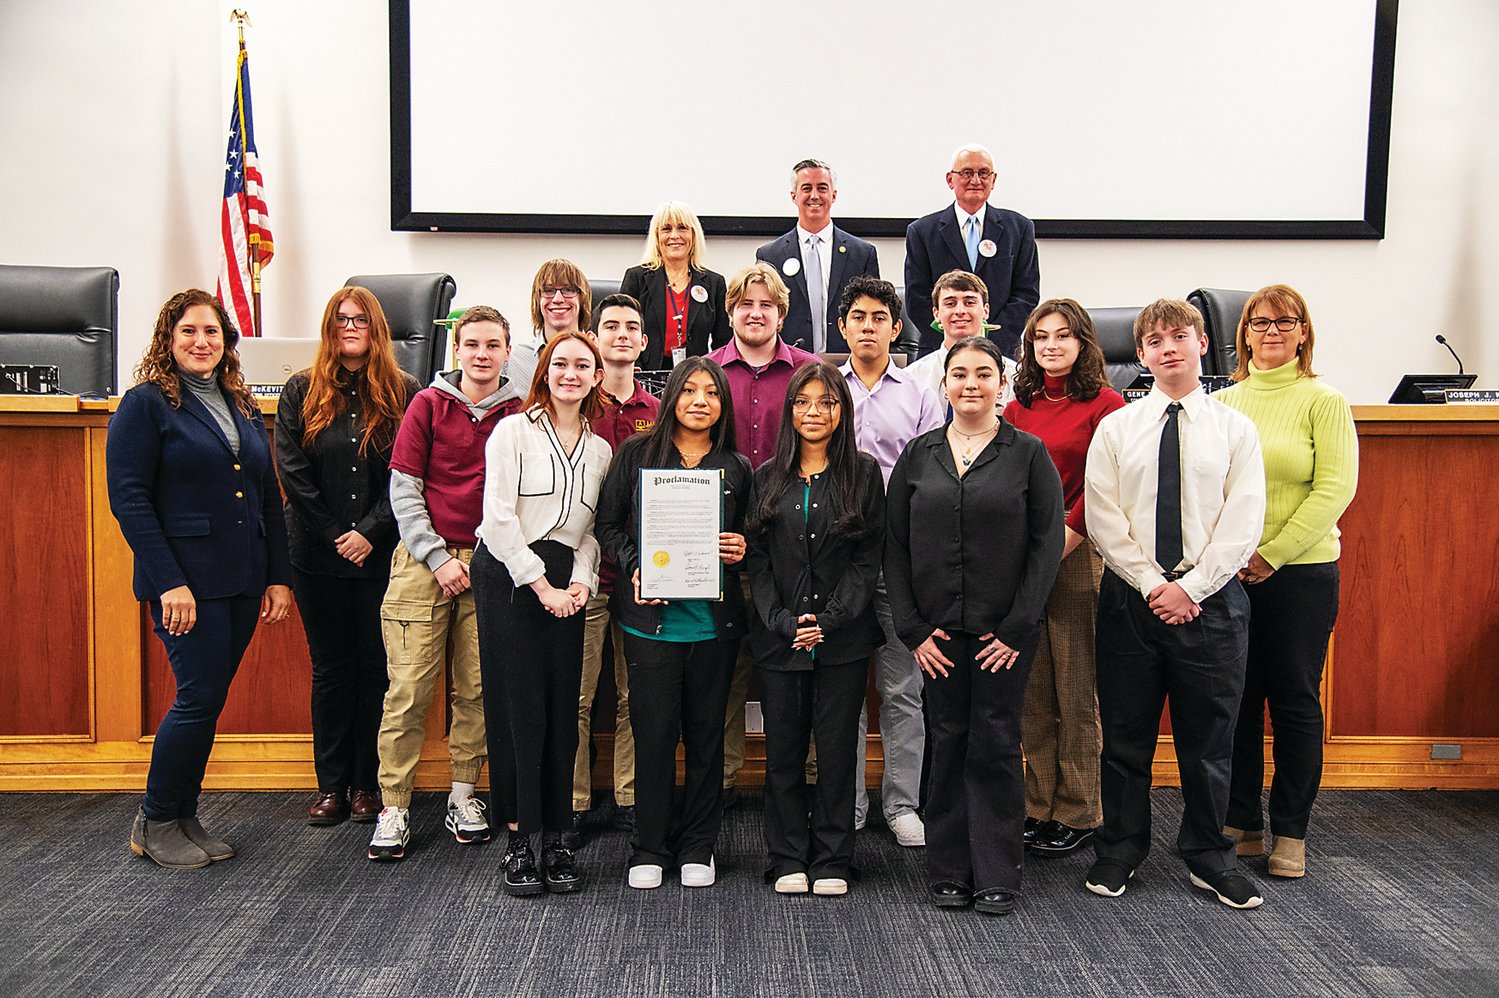 Members of the Middle Bucks Institute of Technology Philanthropy Today Club visited the Bucks County Commissioners’ office on  Feb. 1.